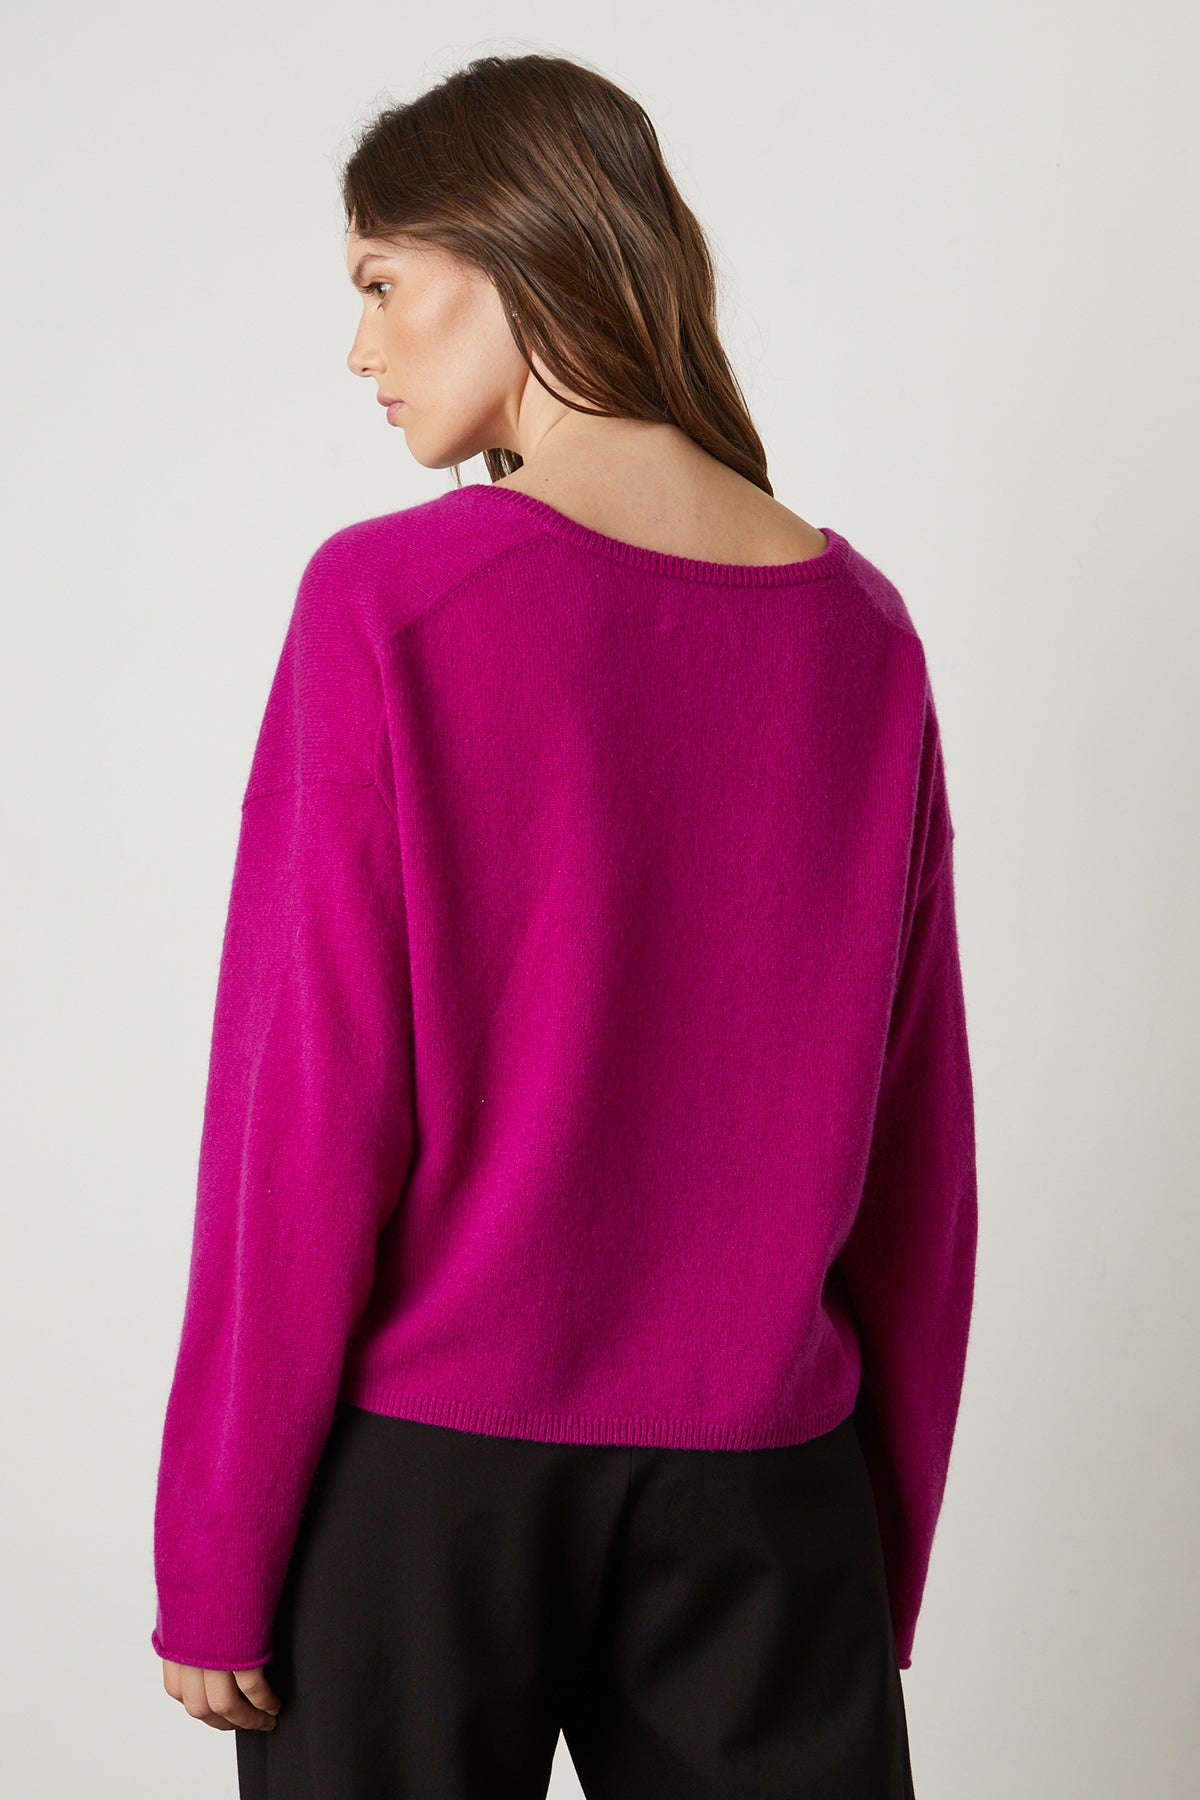   Amika Cashmere V-Neck Sweater in bright magenta pink with Leona pant back 